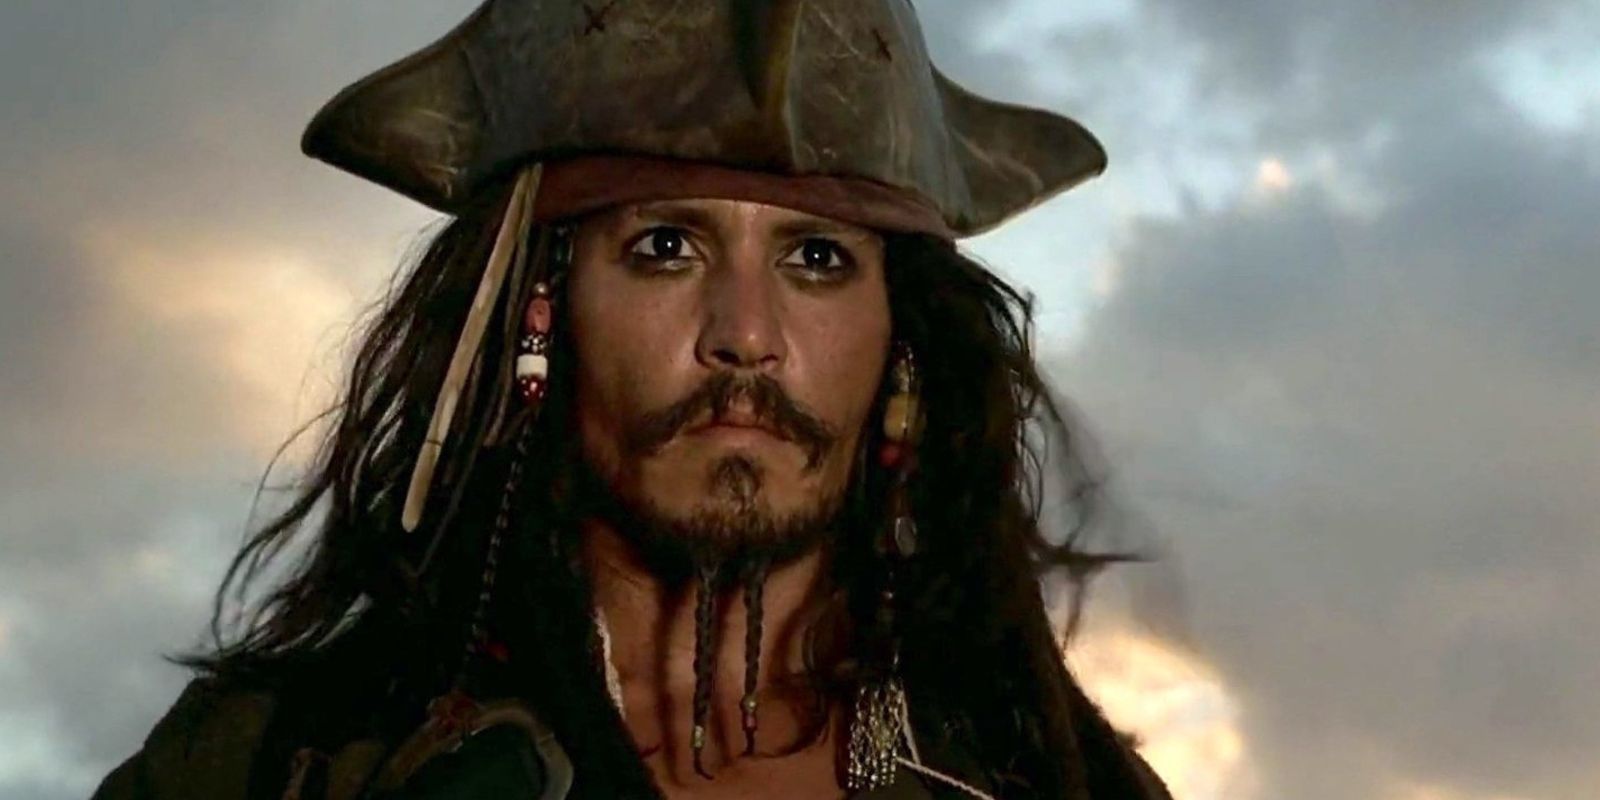 Johnny Depp is Jack Sparrow in Pirates of the Caribbean